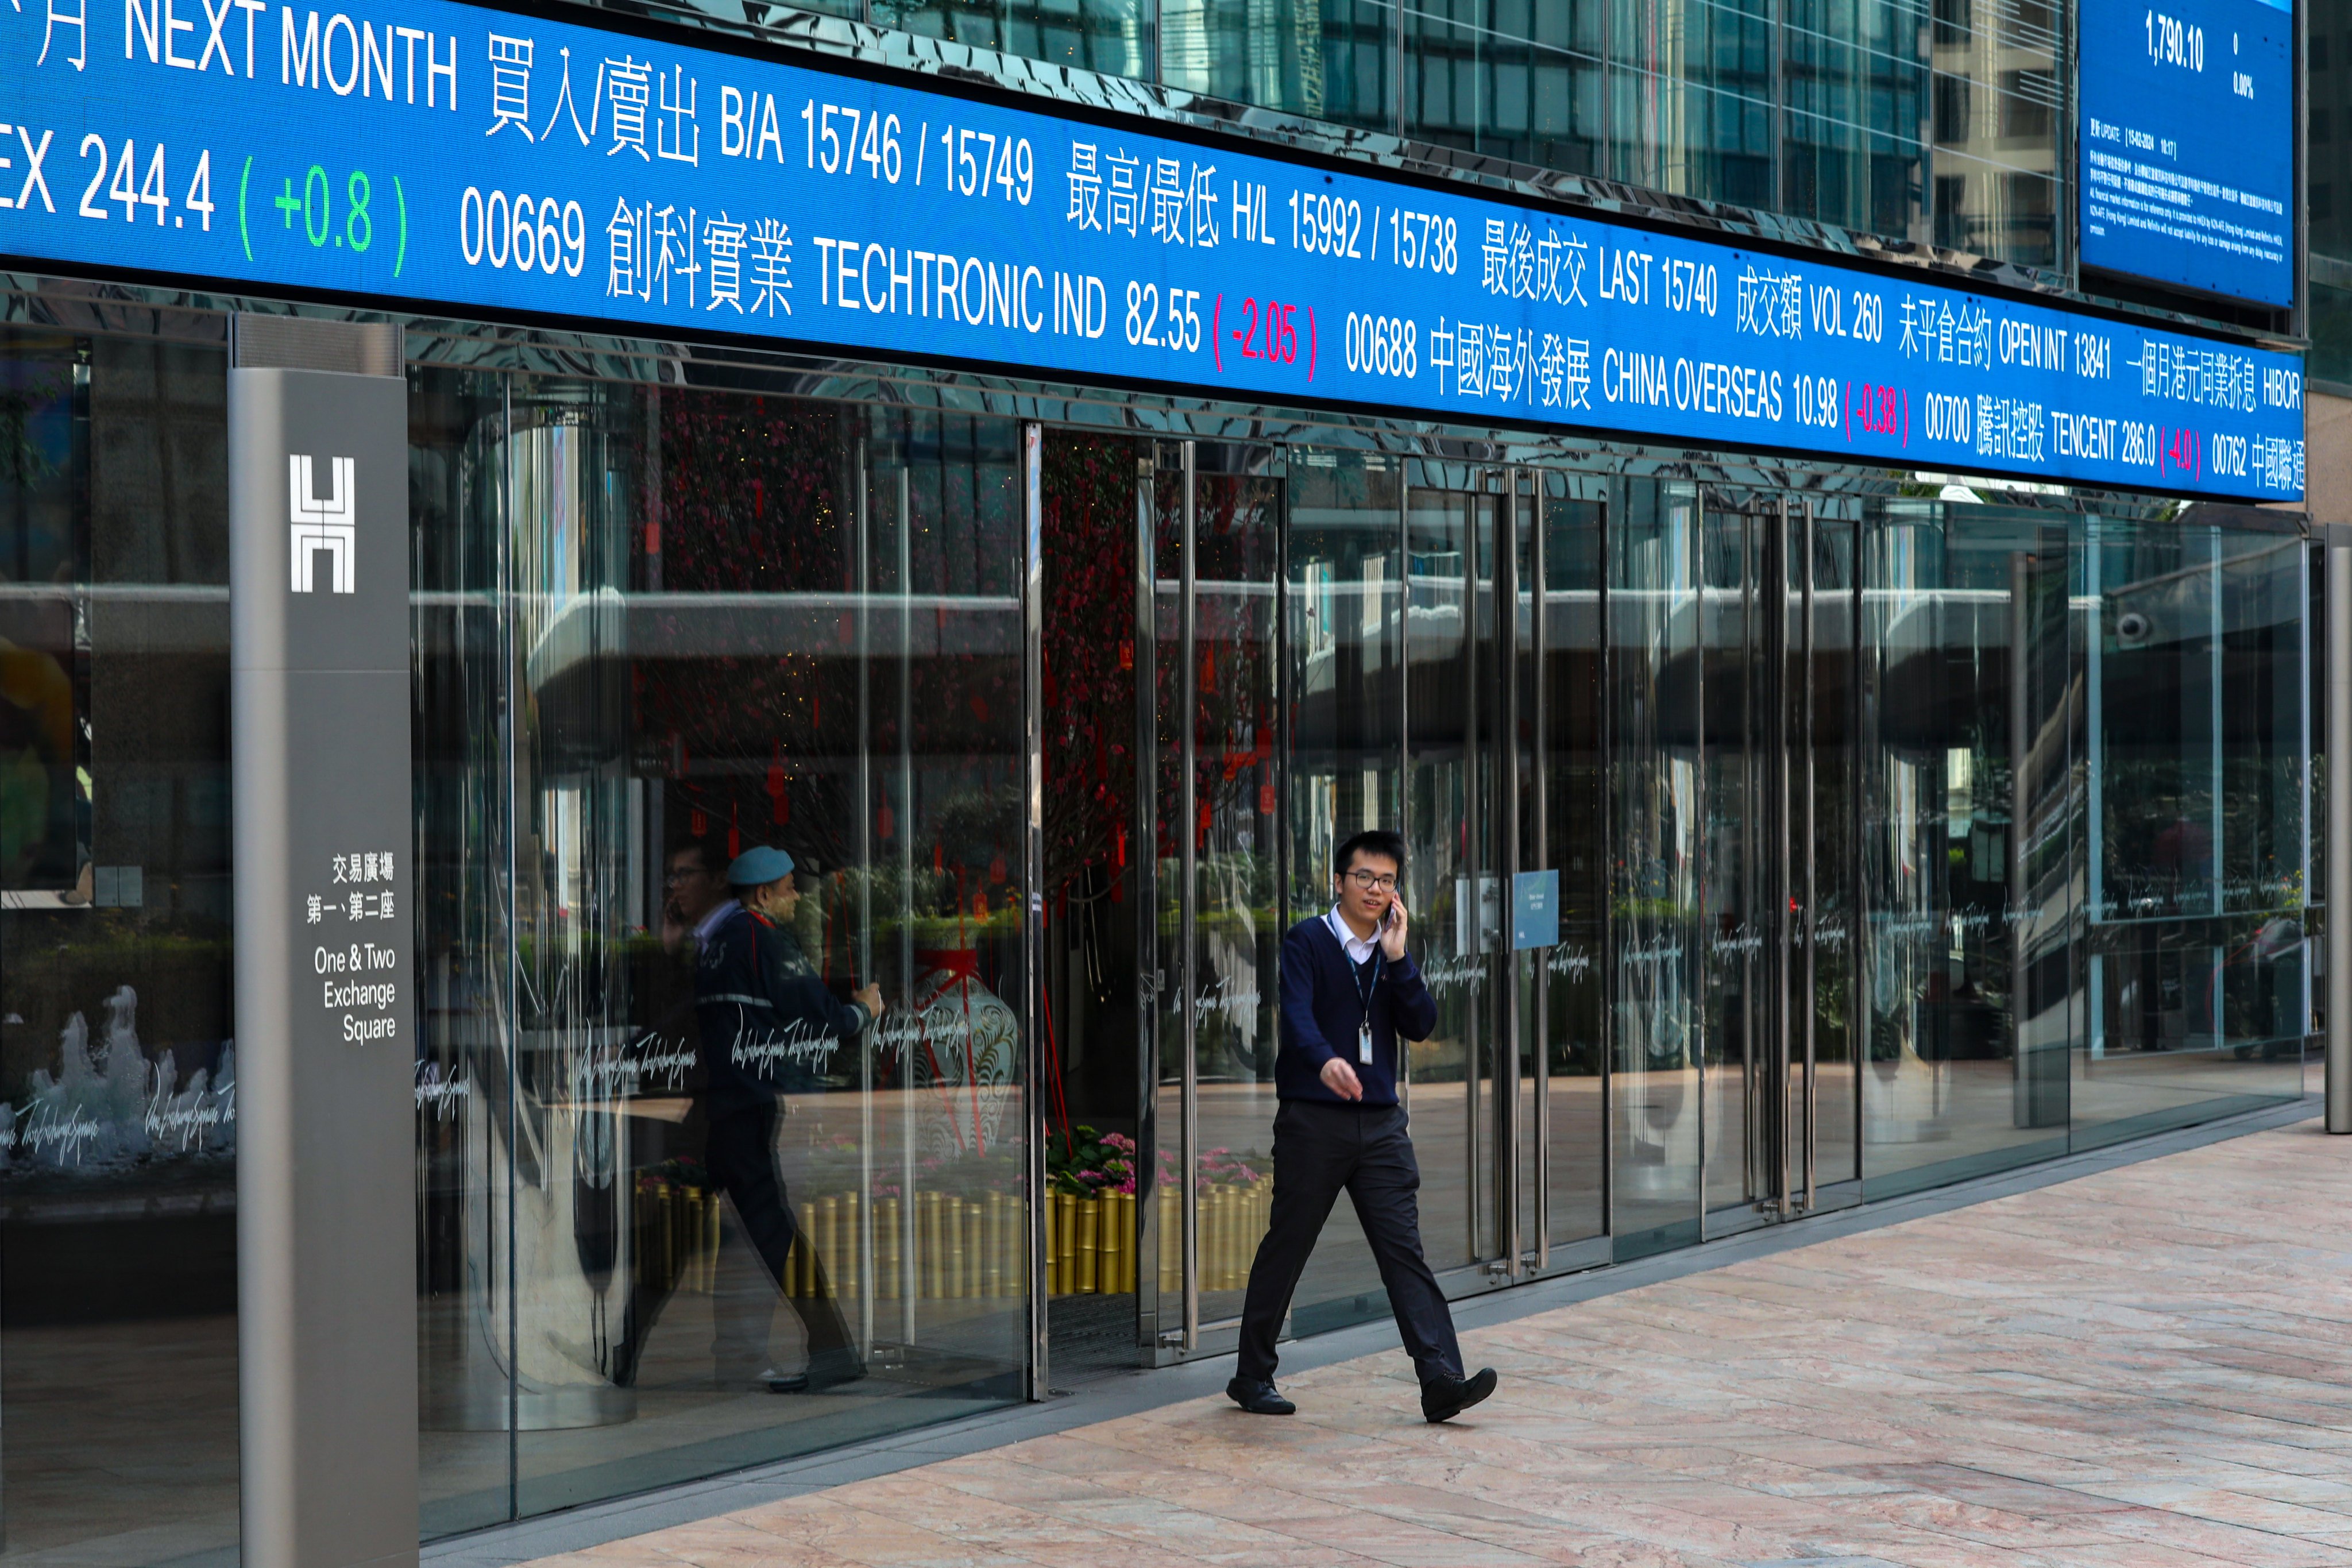 The Hang Seng Index finished Monday at the highest level since September 4, while its 14-day relative strength index has risen above 70, a threshold at which analysts deem stocks overbought and ripe for a correction. Photo: Sun Yeung